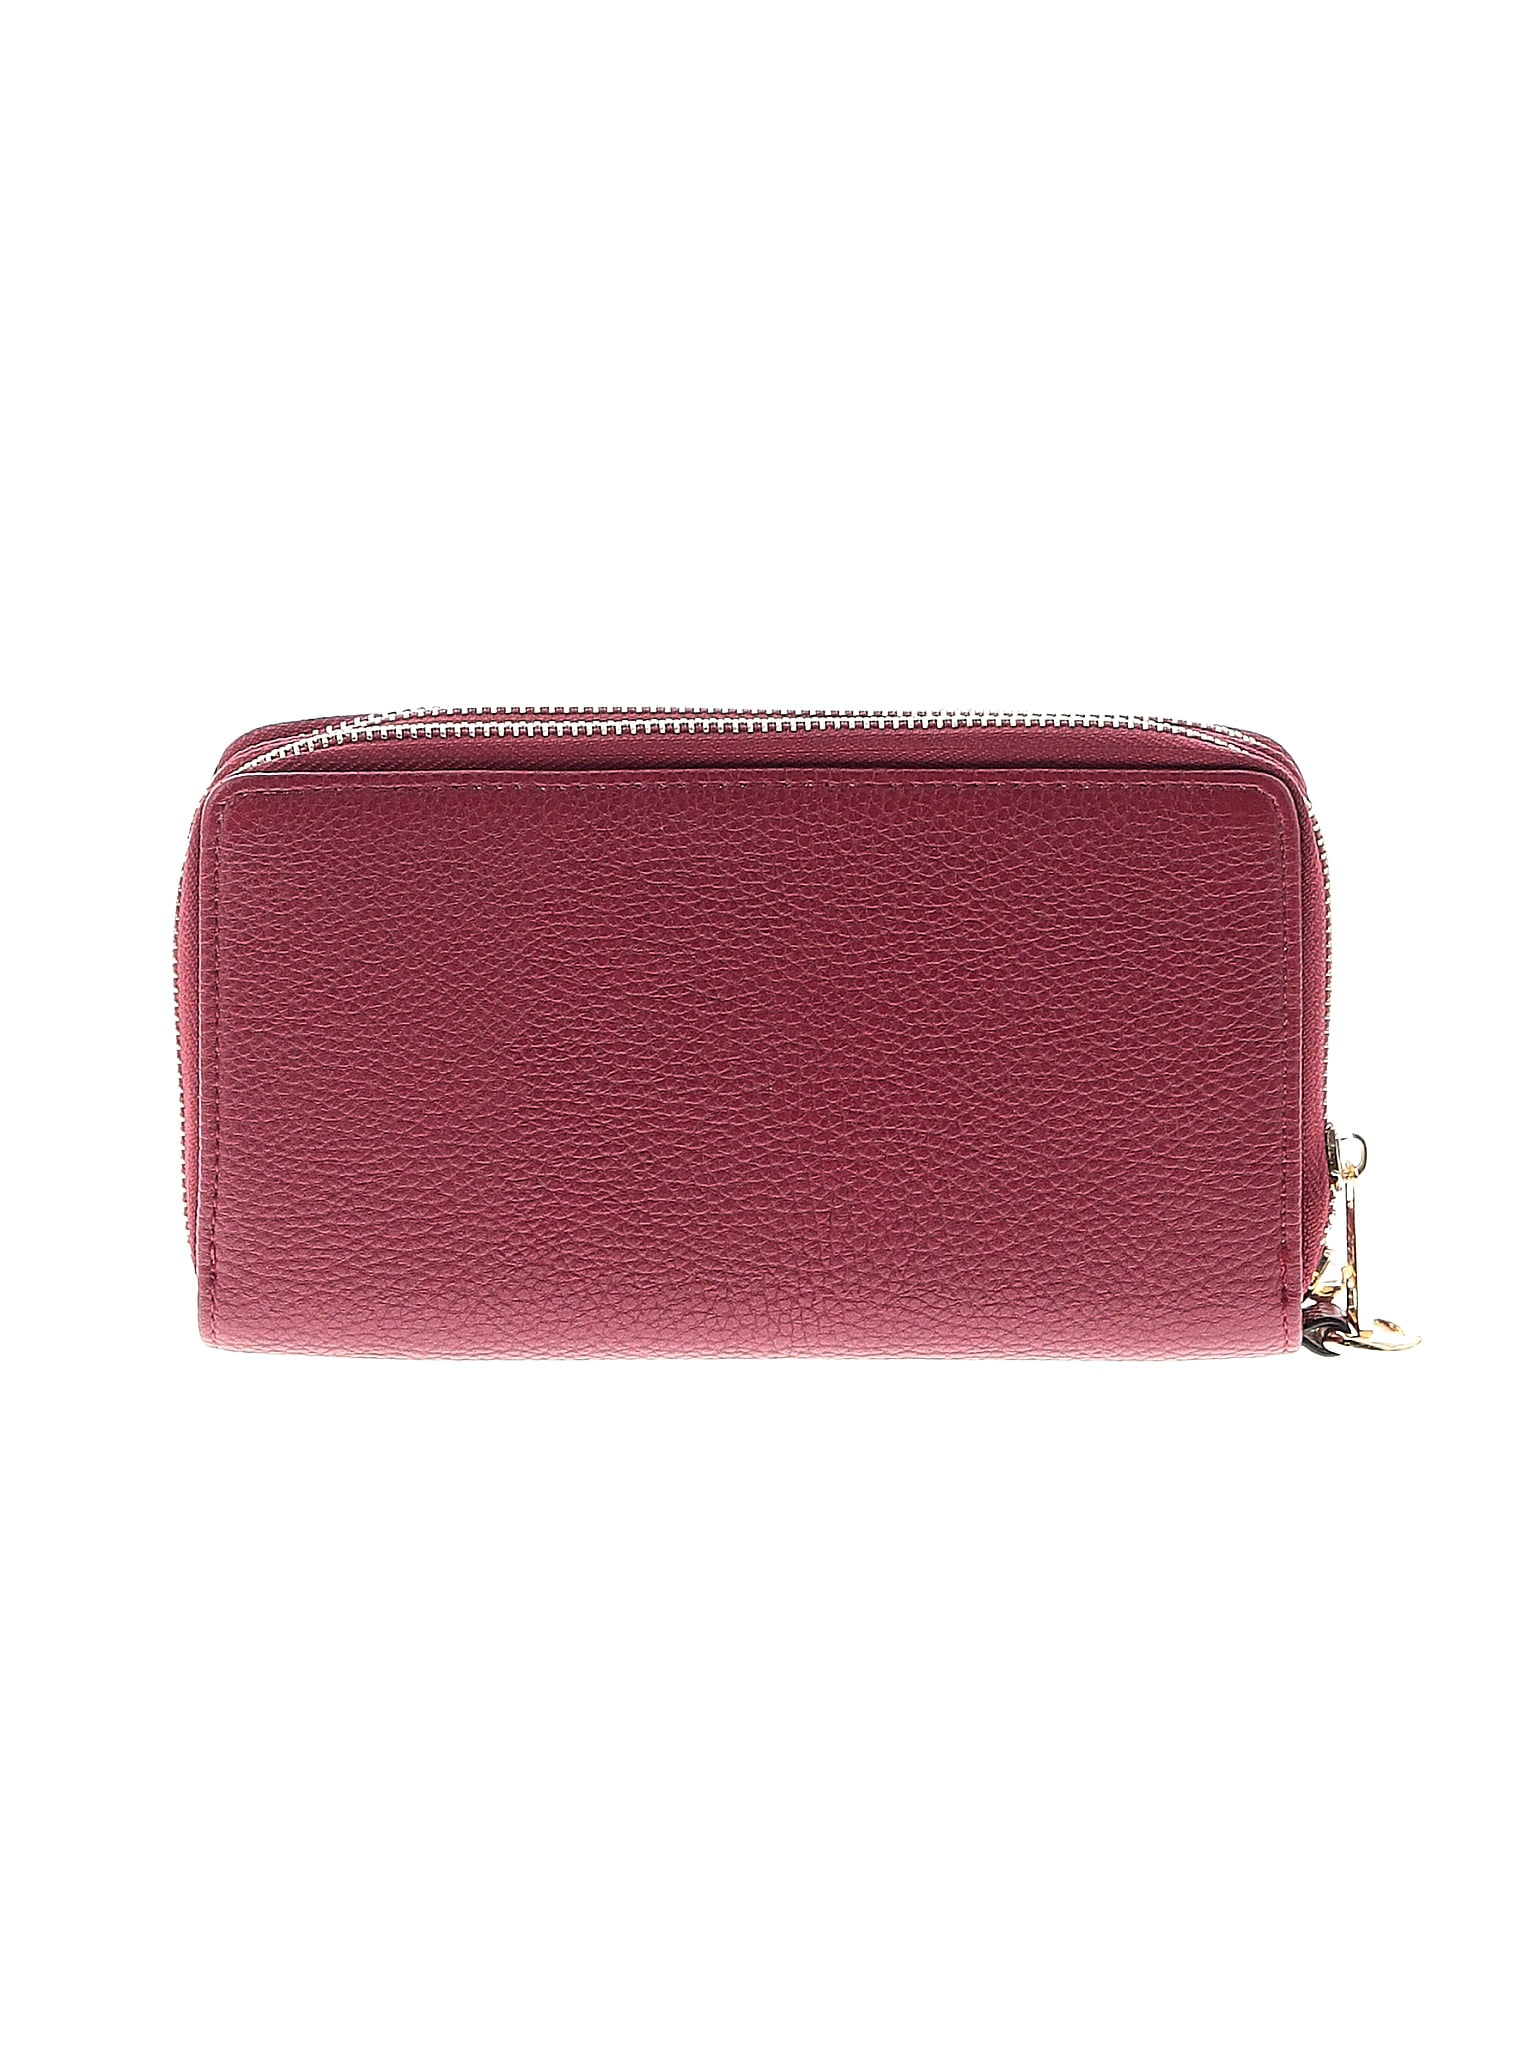 Jessica+Moore+Luxe+Handbag+Berry+Purse+Leather for sale online